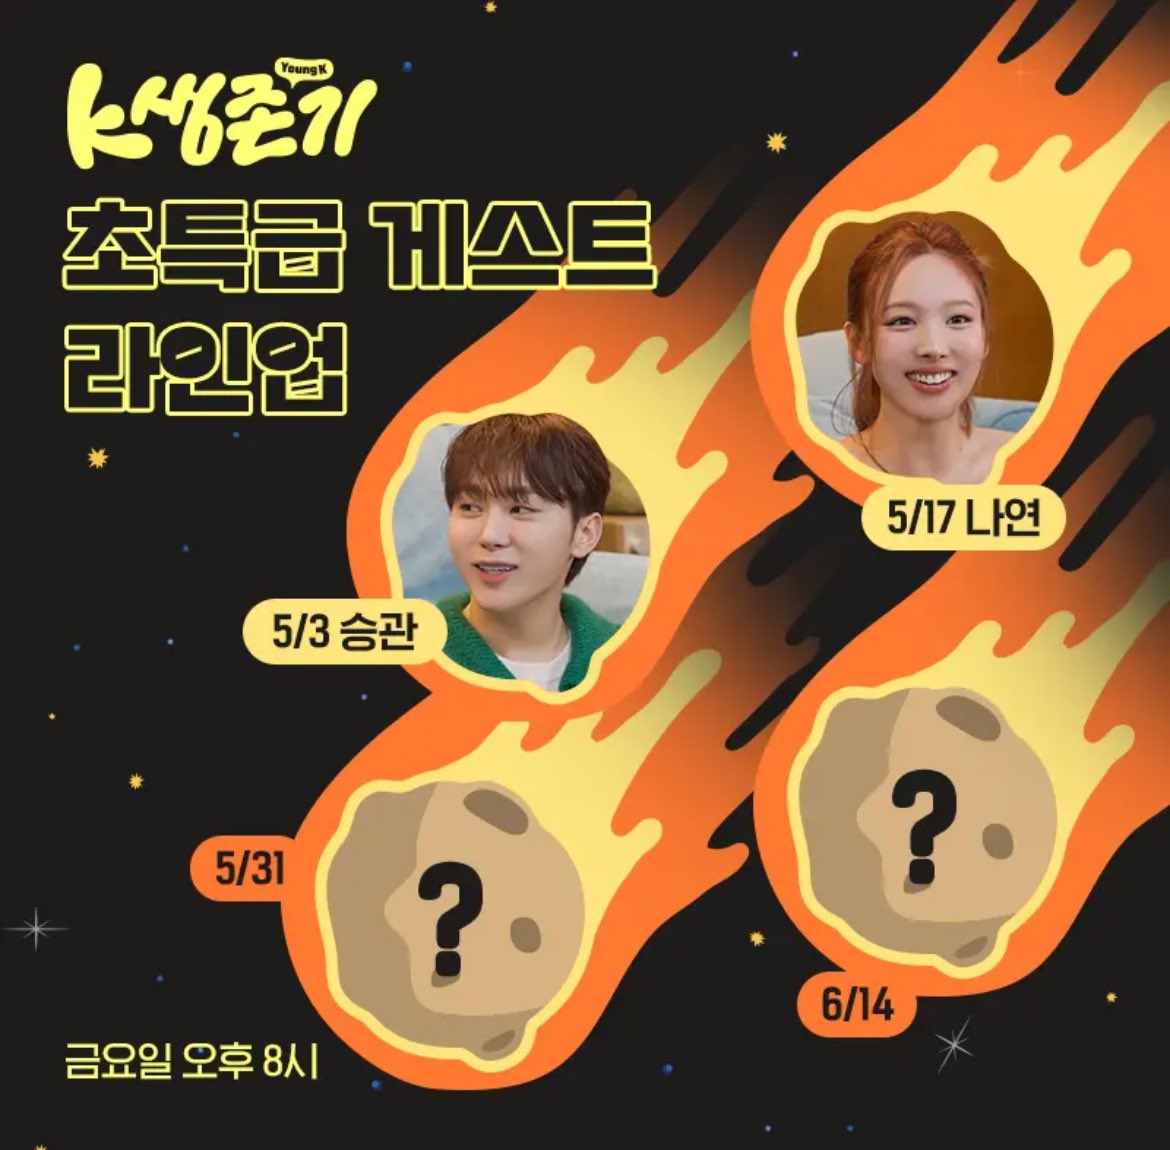 NAYEON will appear on Day6's YoungK survival talk show <K-생존기>. It is on YouTube Channel 117 17 May (Fri) 8PM KST